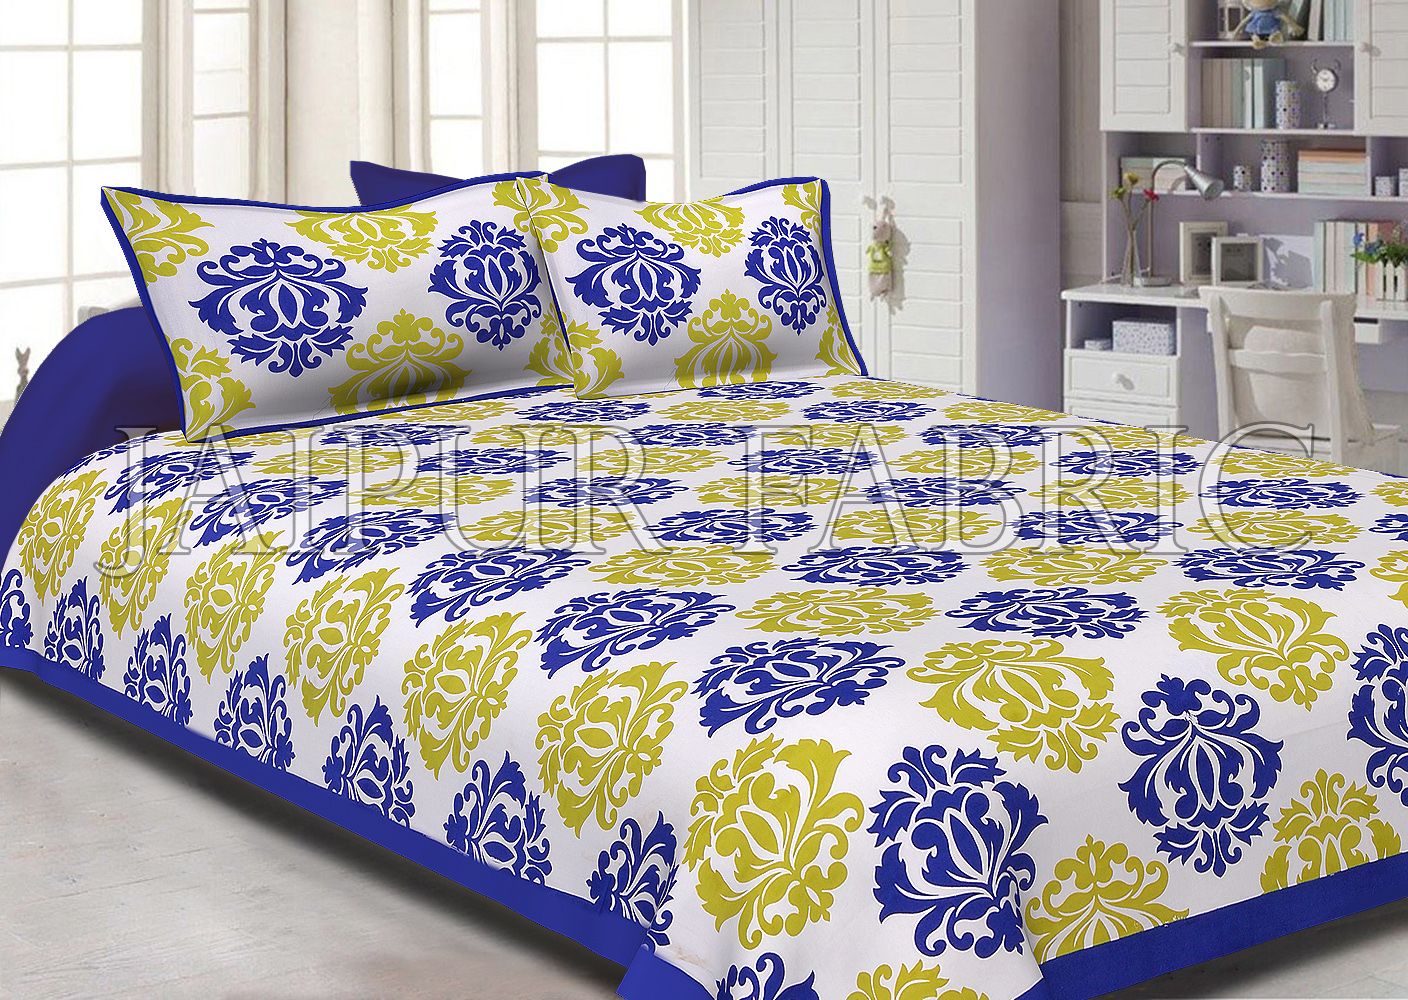 Navy Blue boader cream base with floral pattern double bed sheet